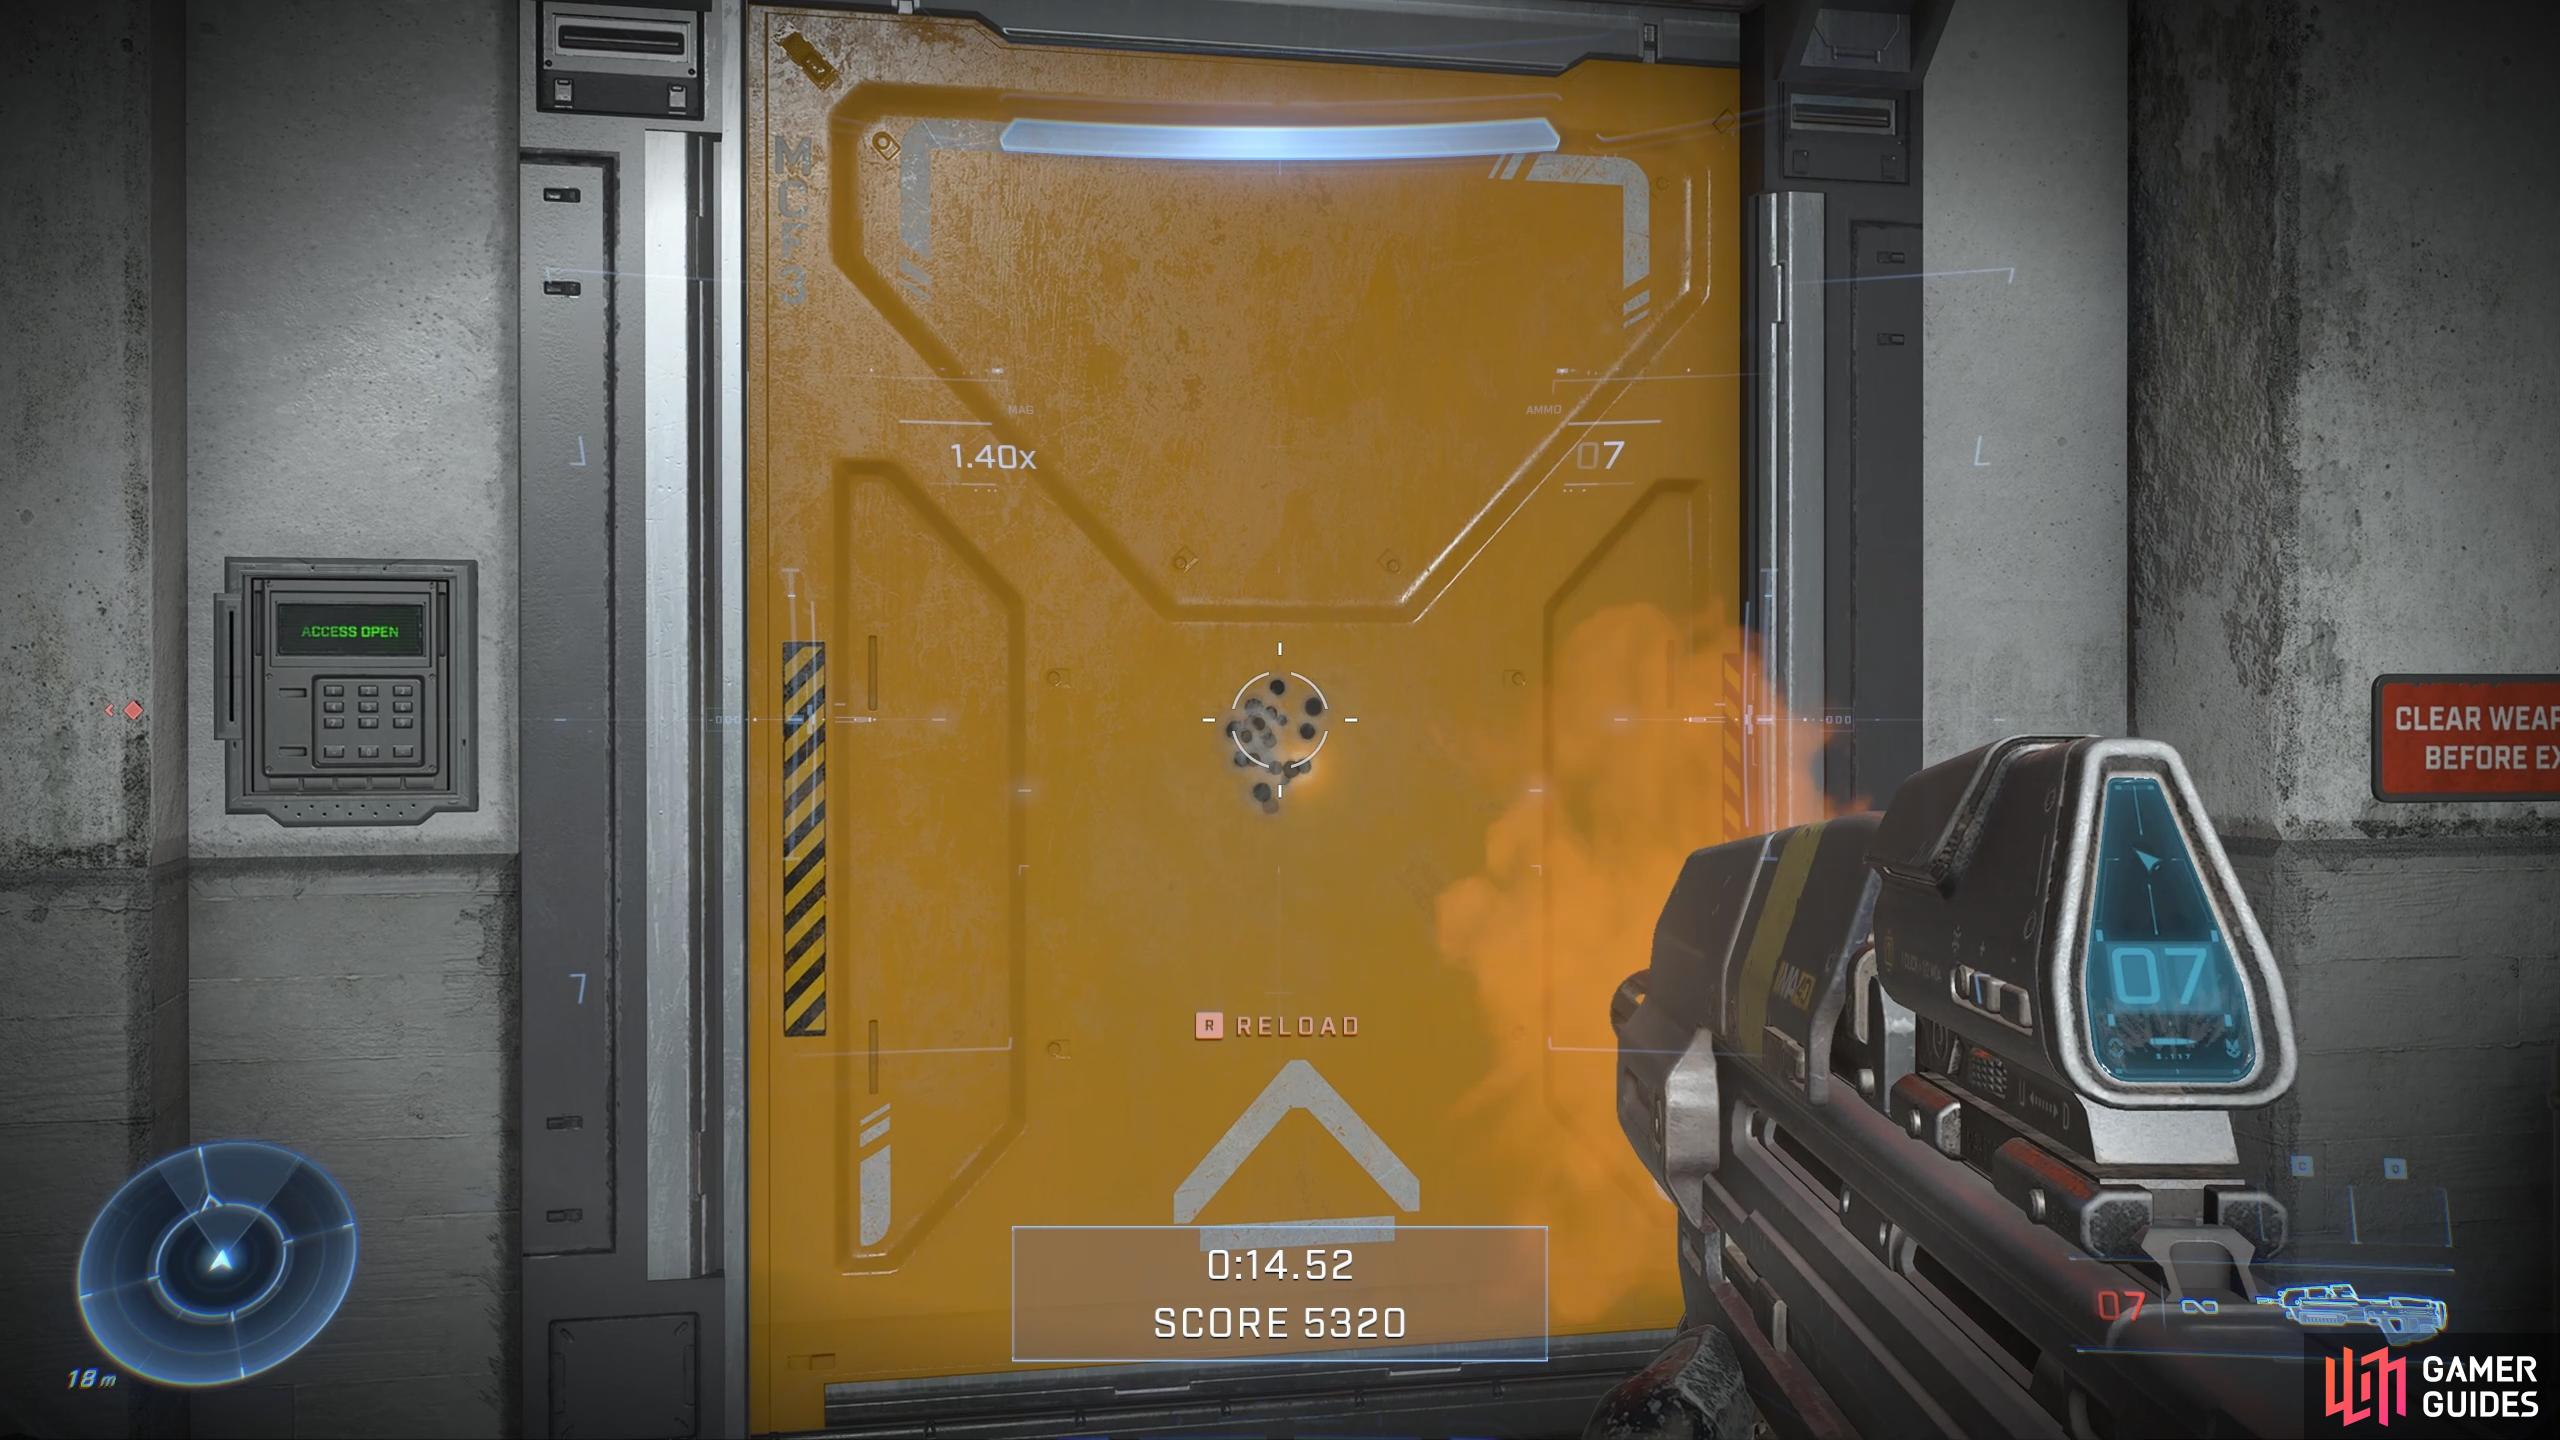 If you continue to fire throughout the magazine round without stopping, the inner reticle will move more towards the outer one, until it's out of the circle. This indicates maximum bloom effect.